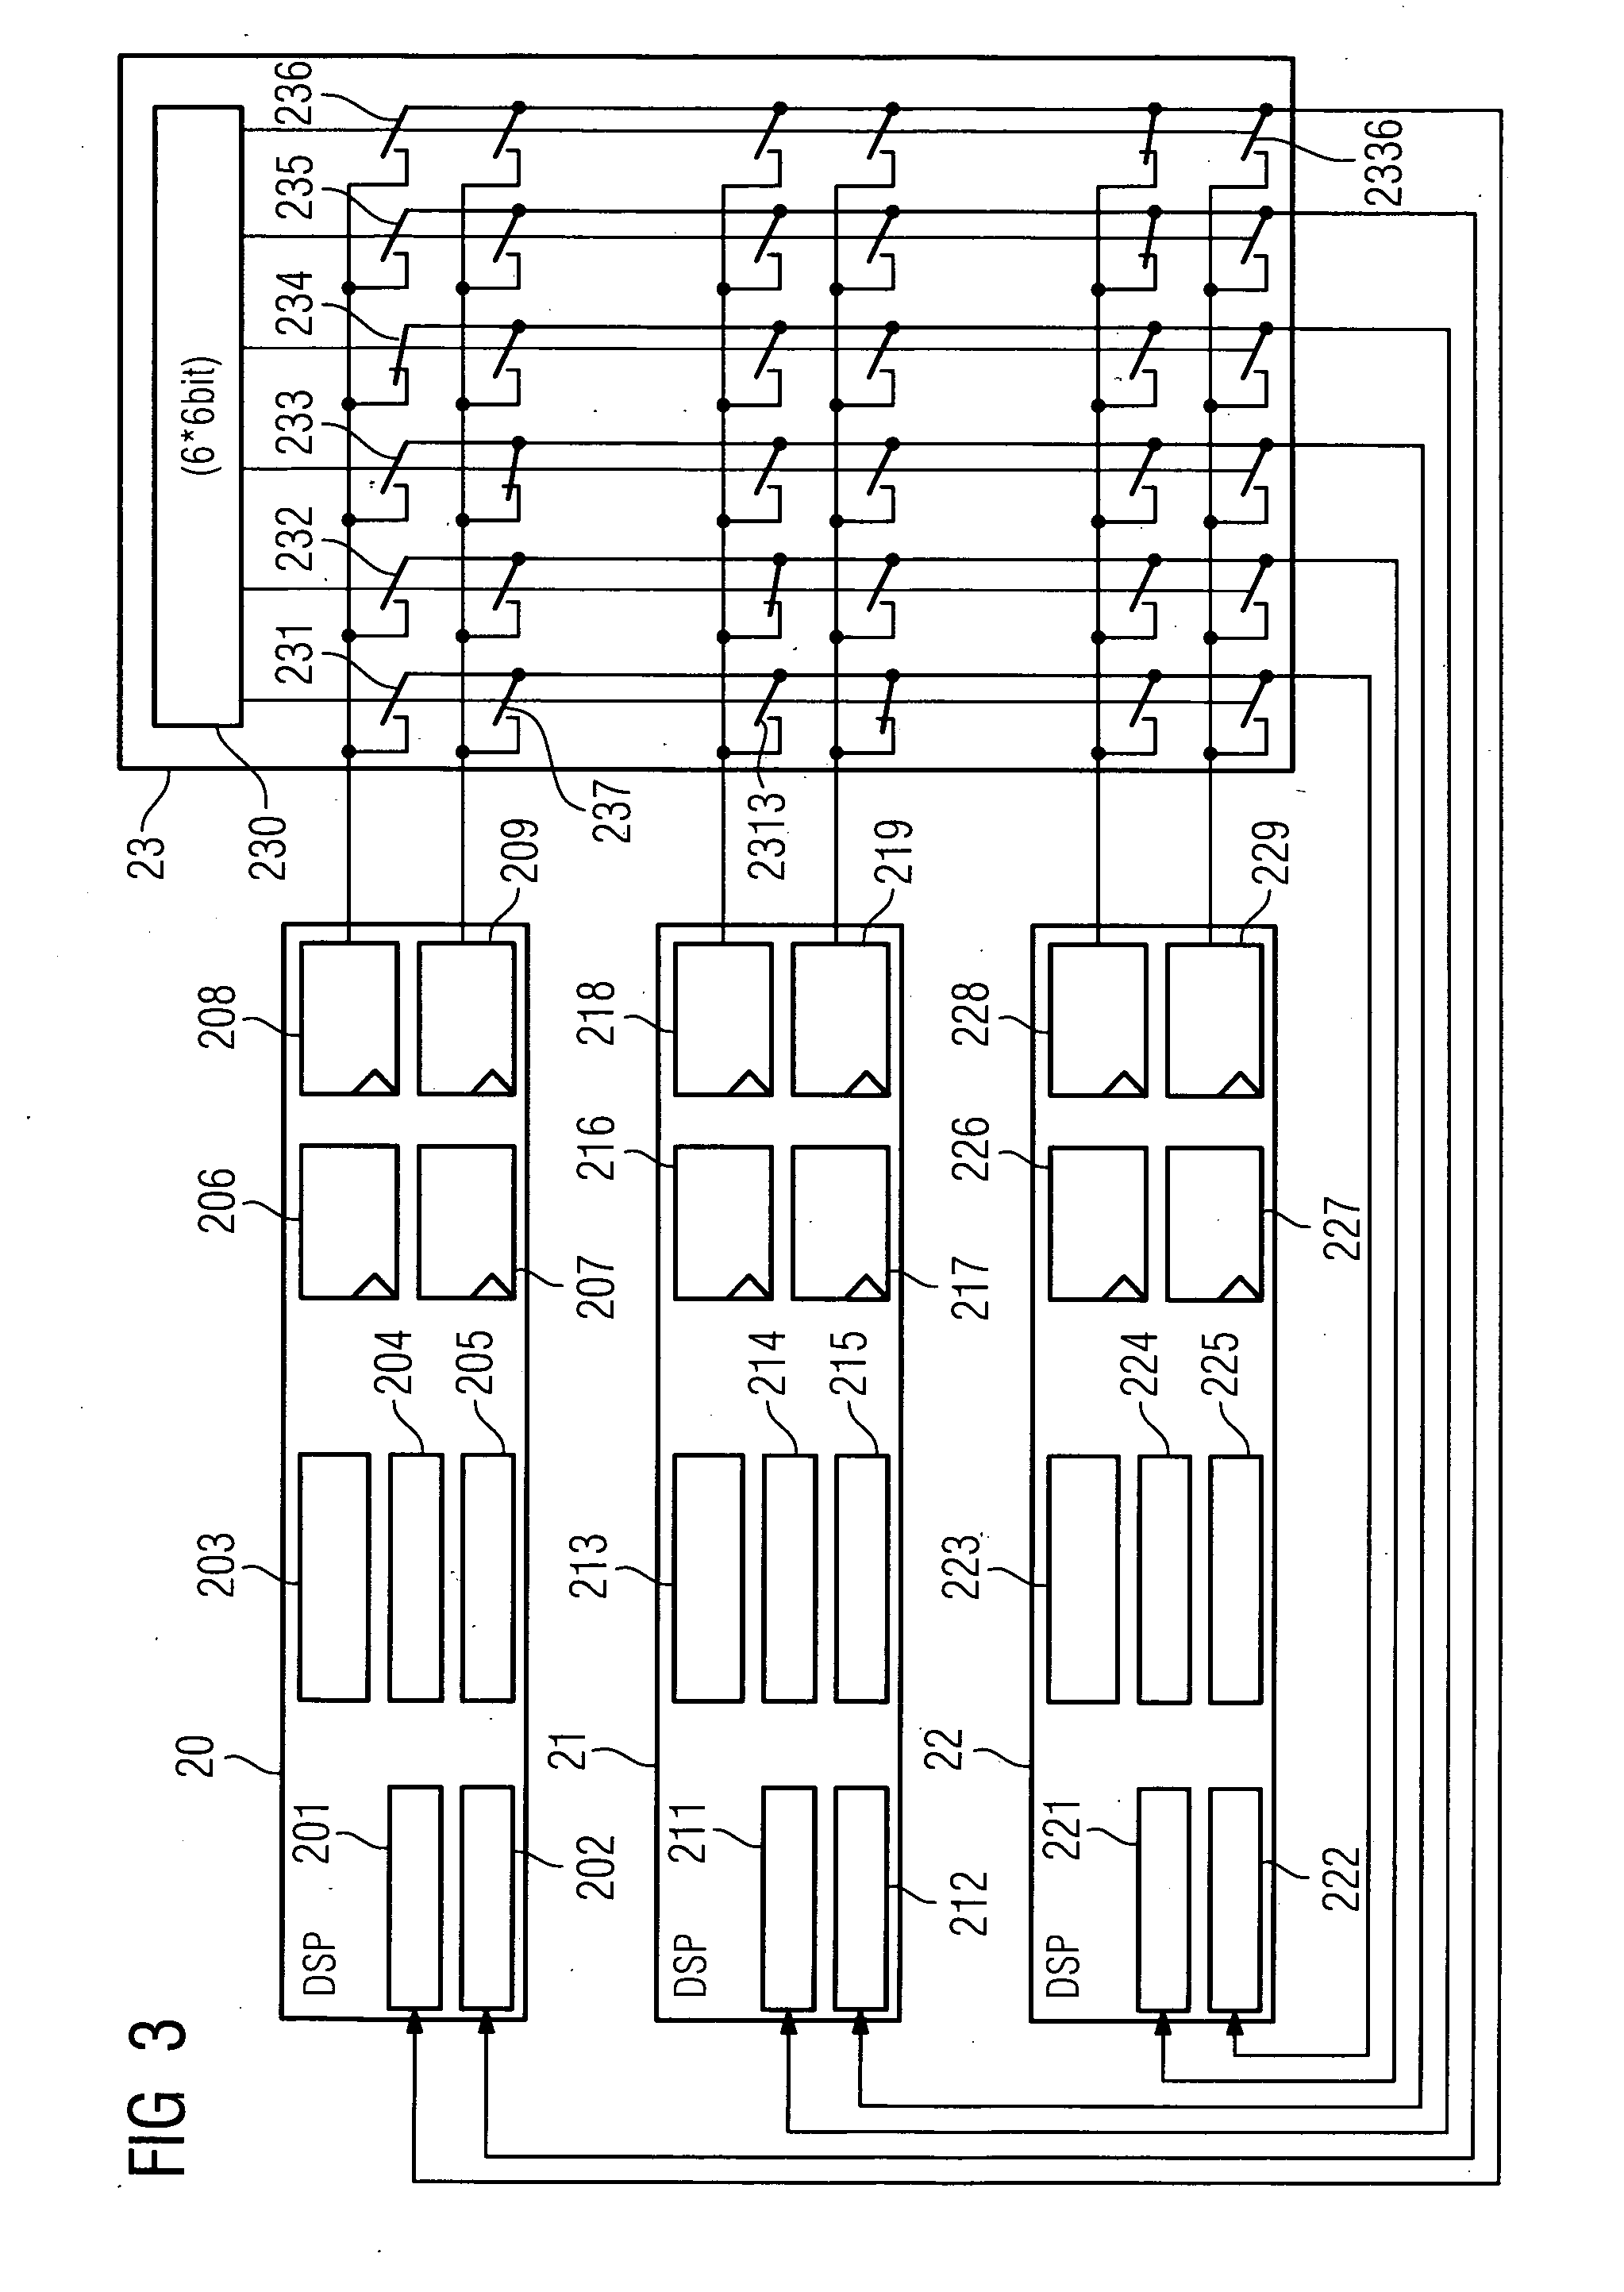 Processor system with directly interconnected ports